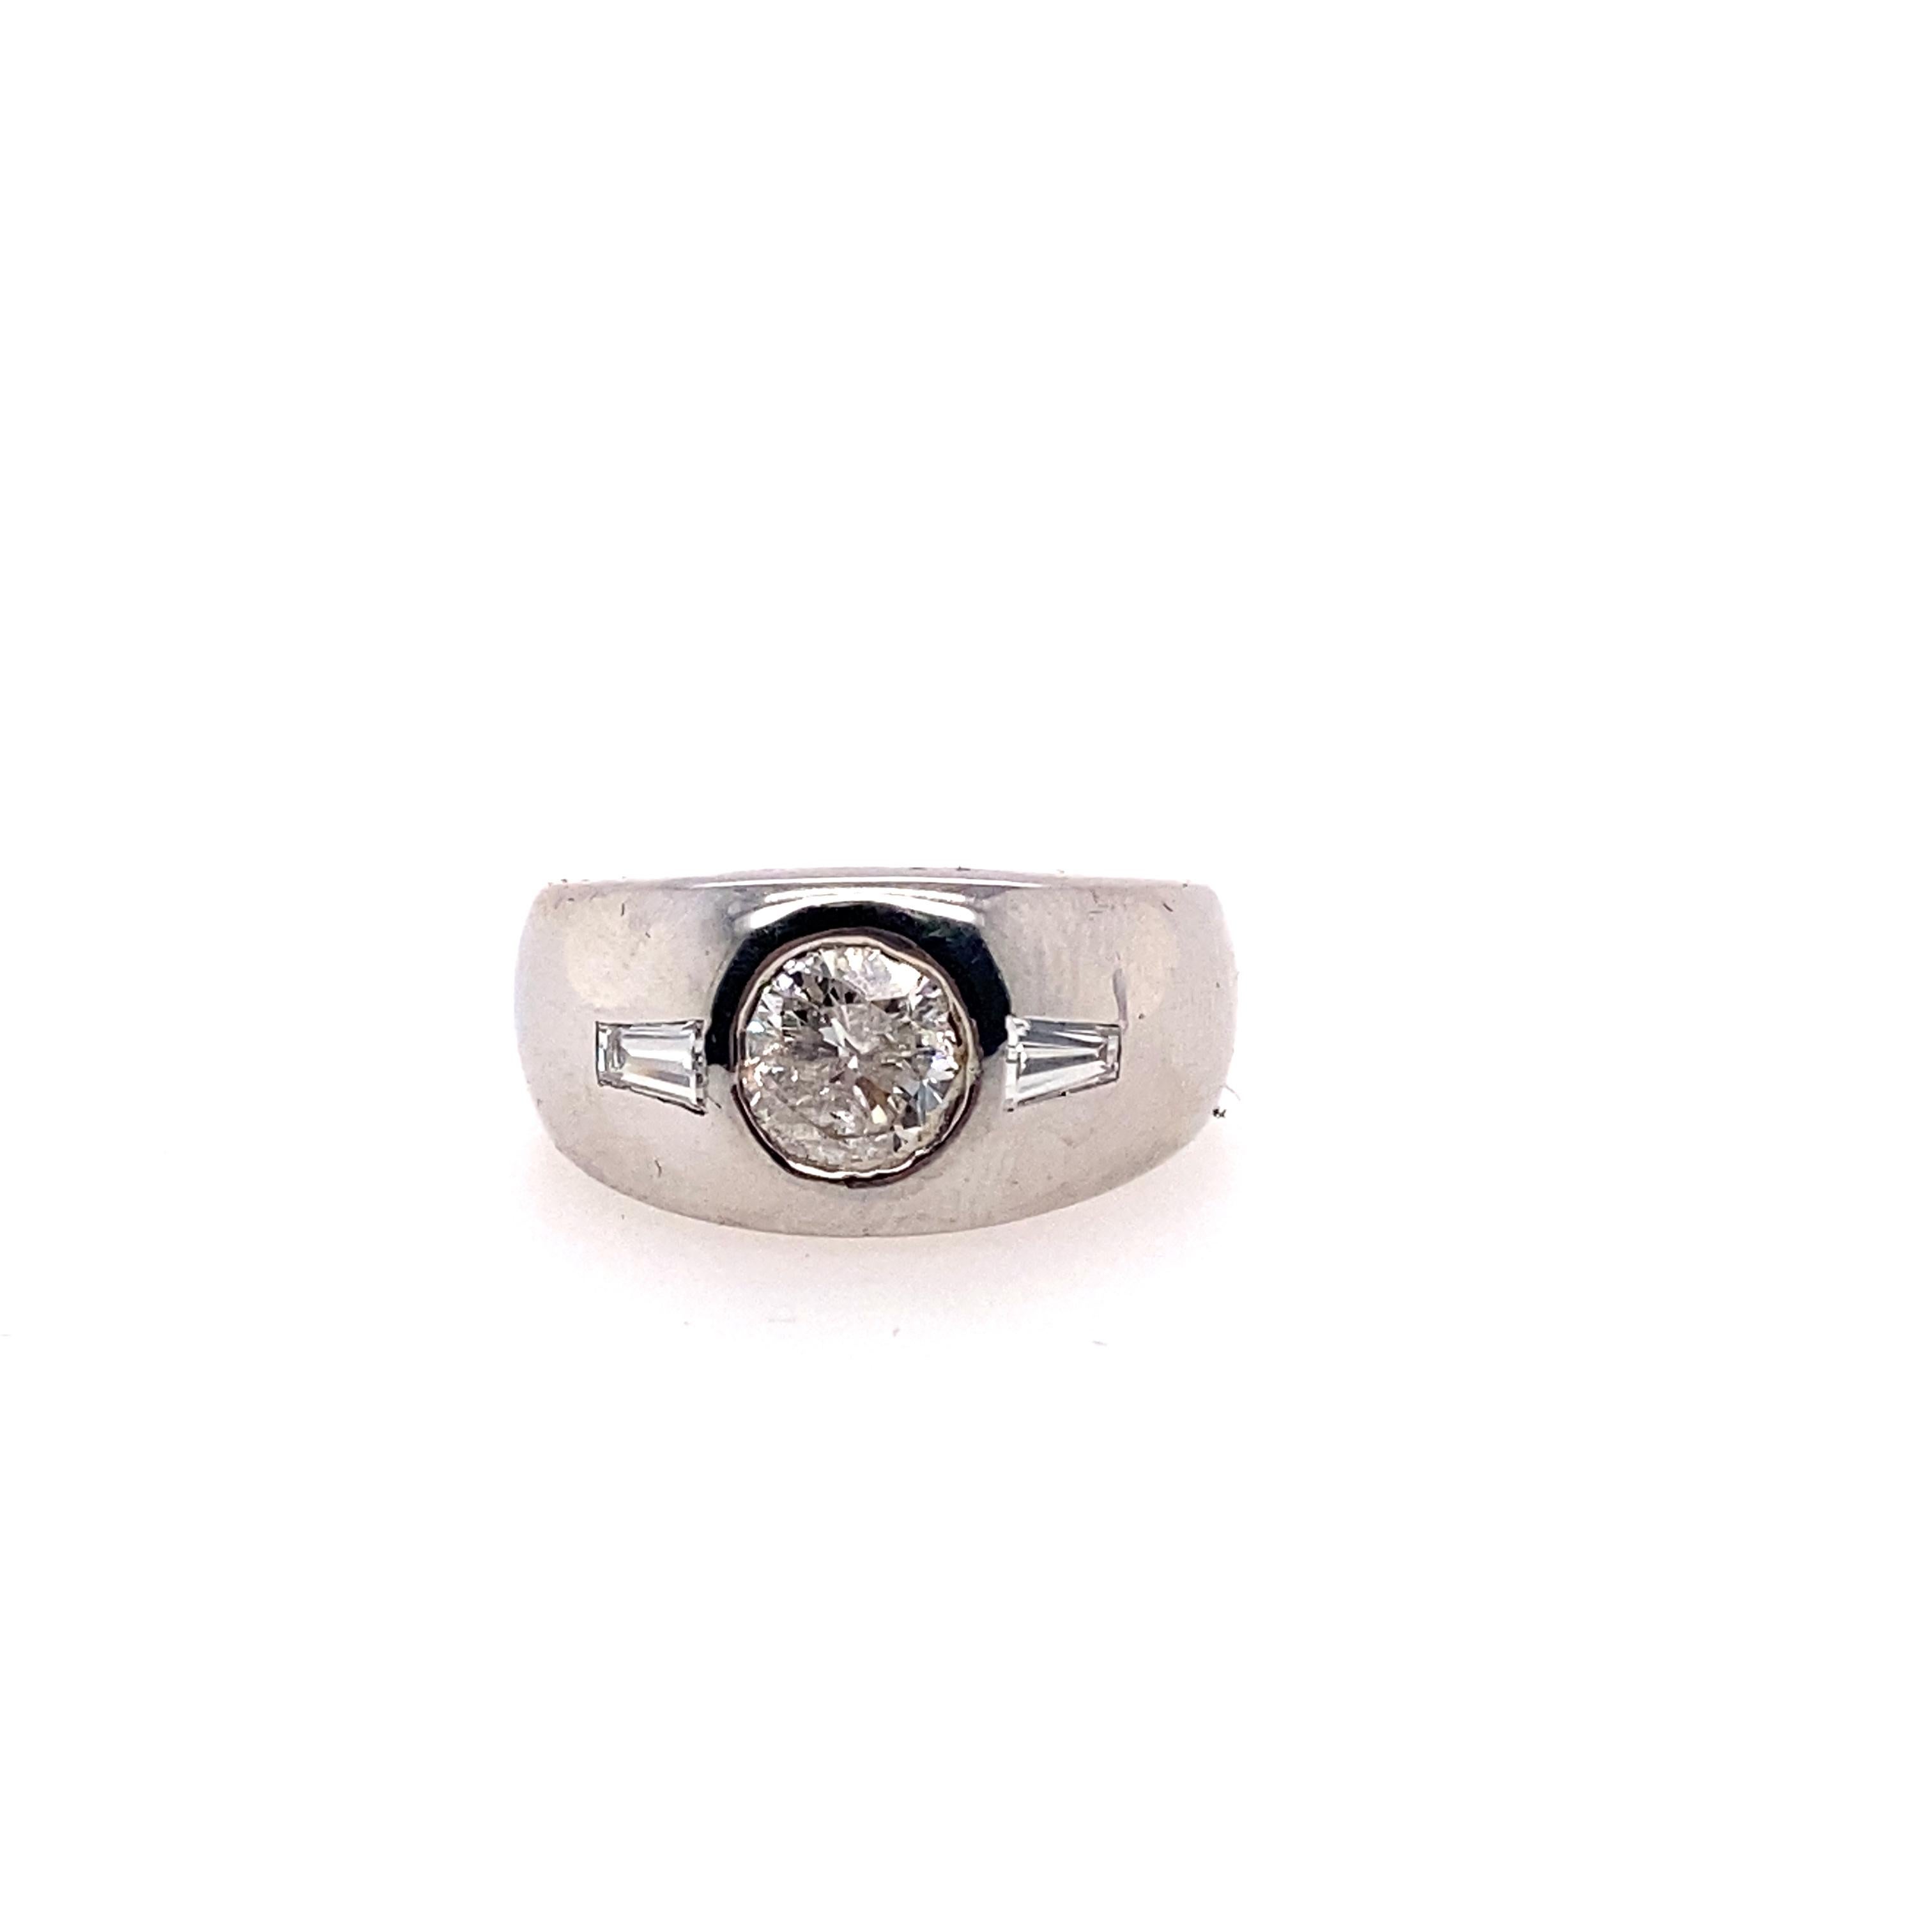 0.75 carat round diamond set as a center stone in the 14K thick band ring and two diamond baguettes also set beside the center diamond respectively. The overall look of this thick band ring features big and bold impressions. 

Center Diamond Weight: